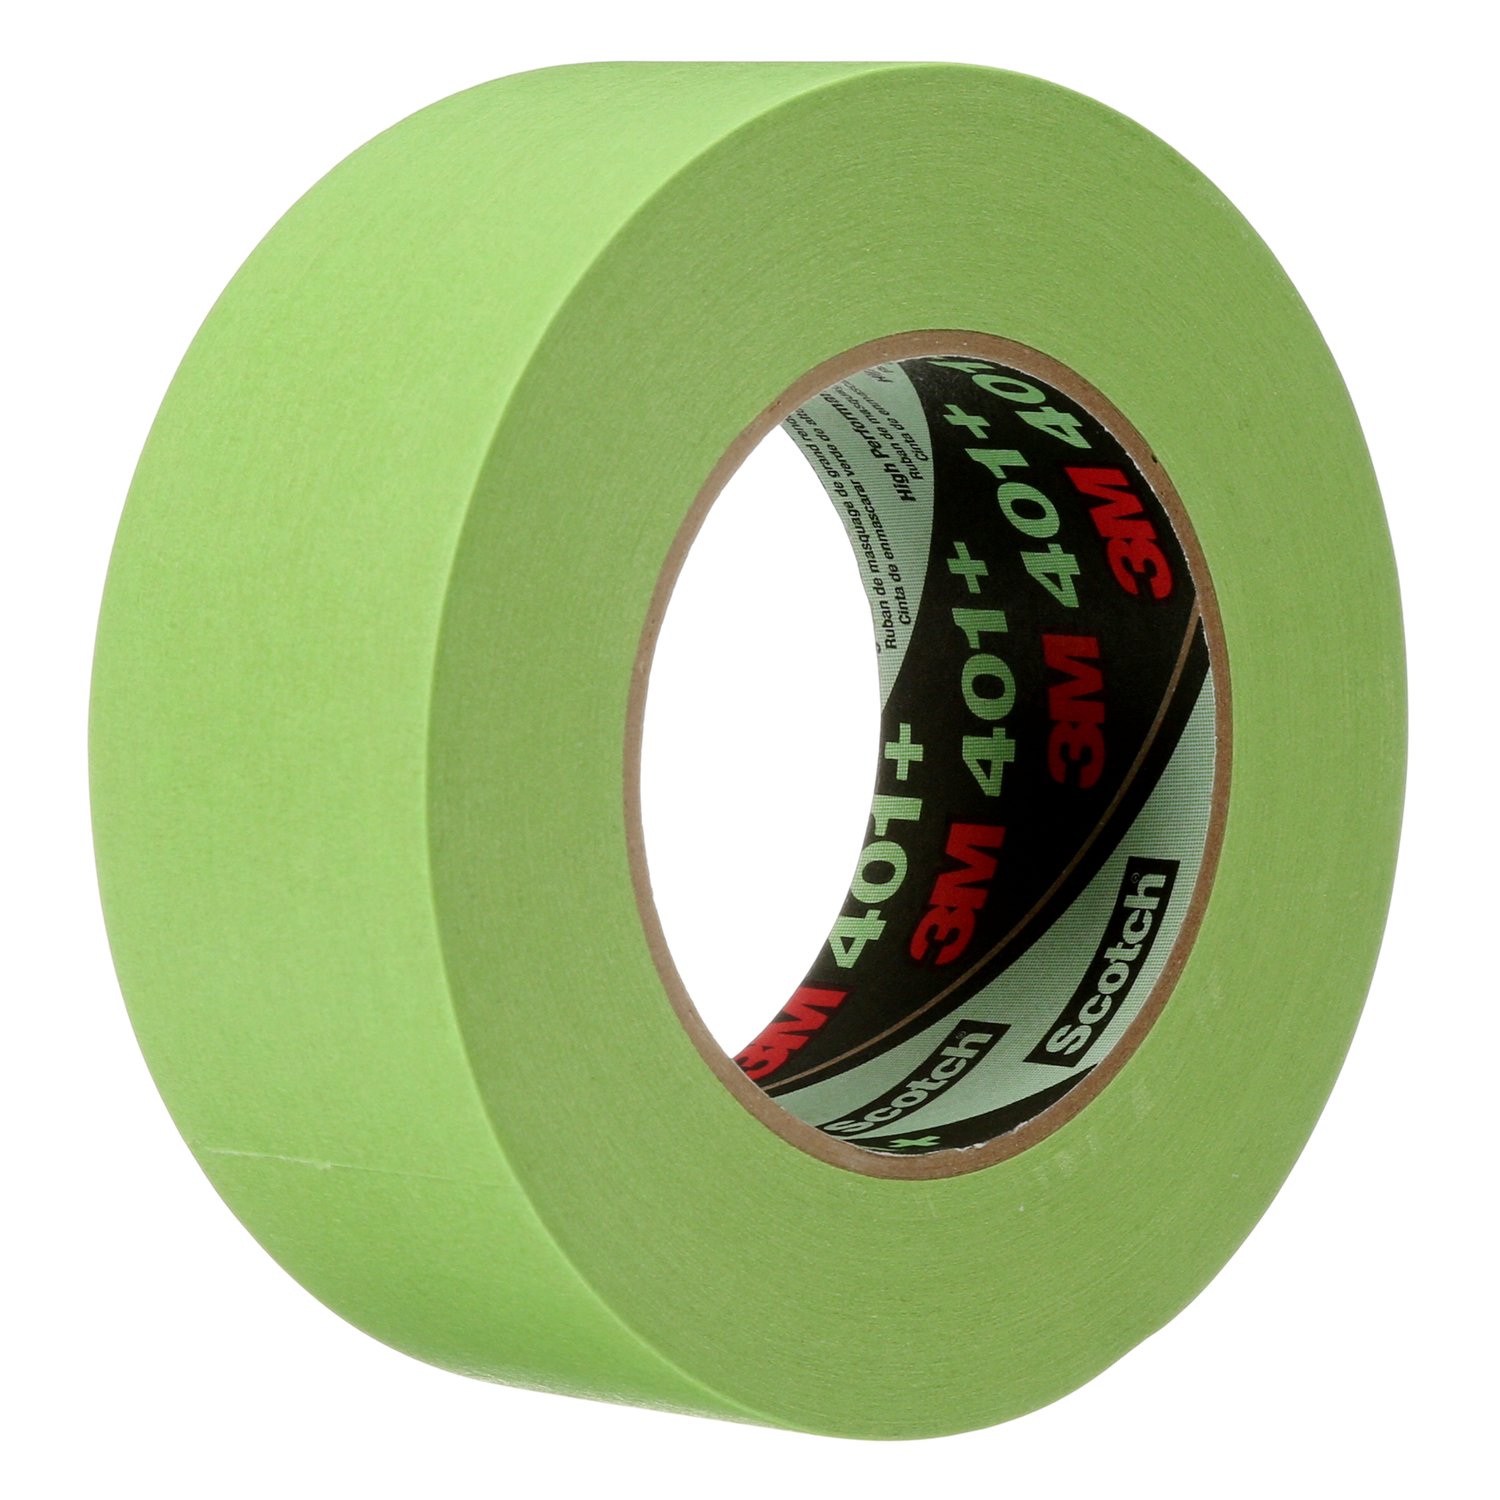 00051115810817  3M High Performance Green Masking Tape 401+, 2 in